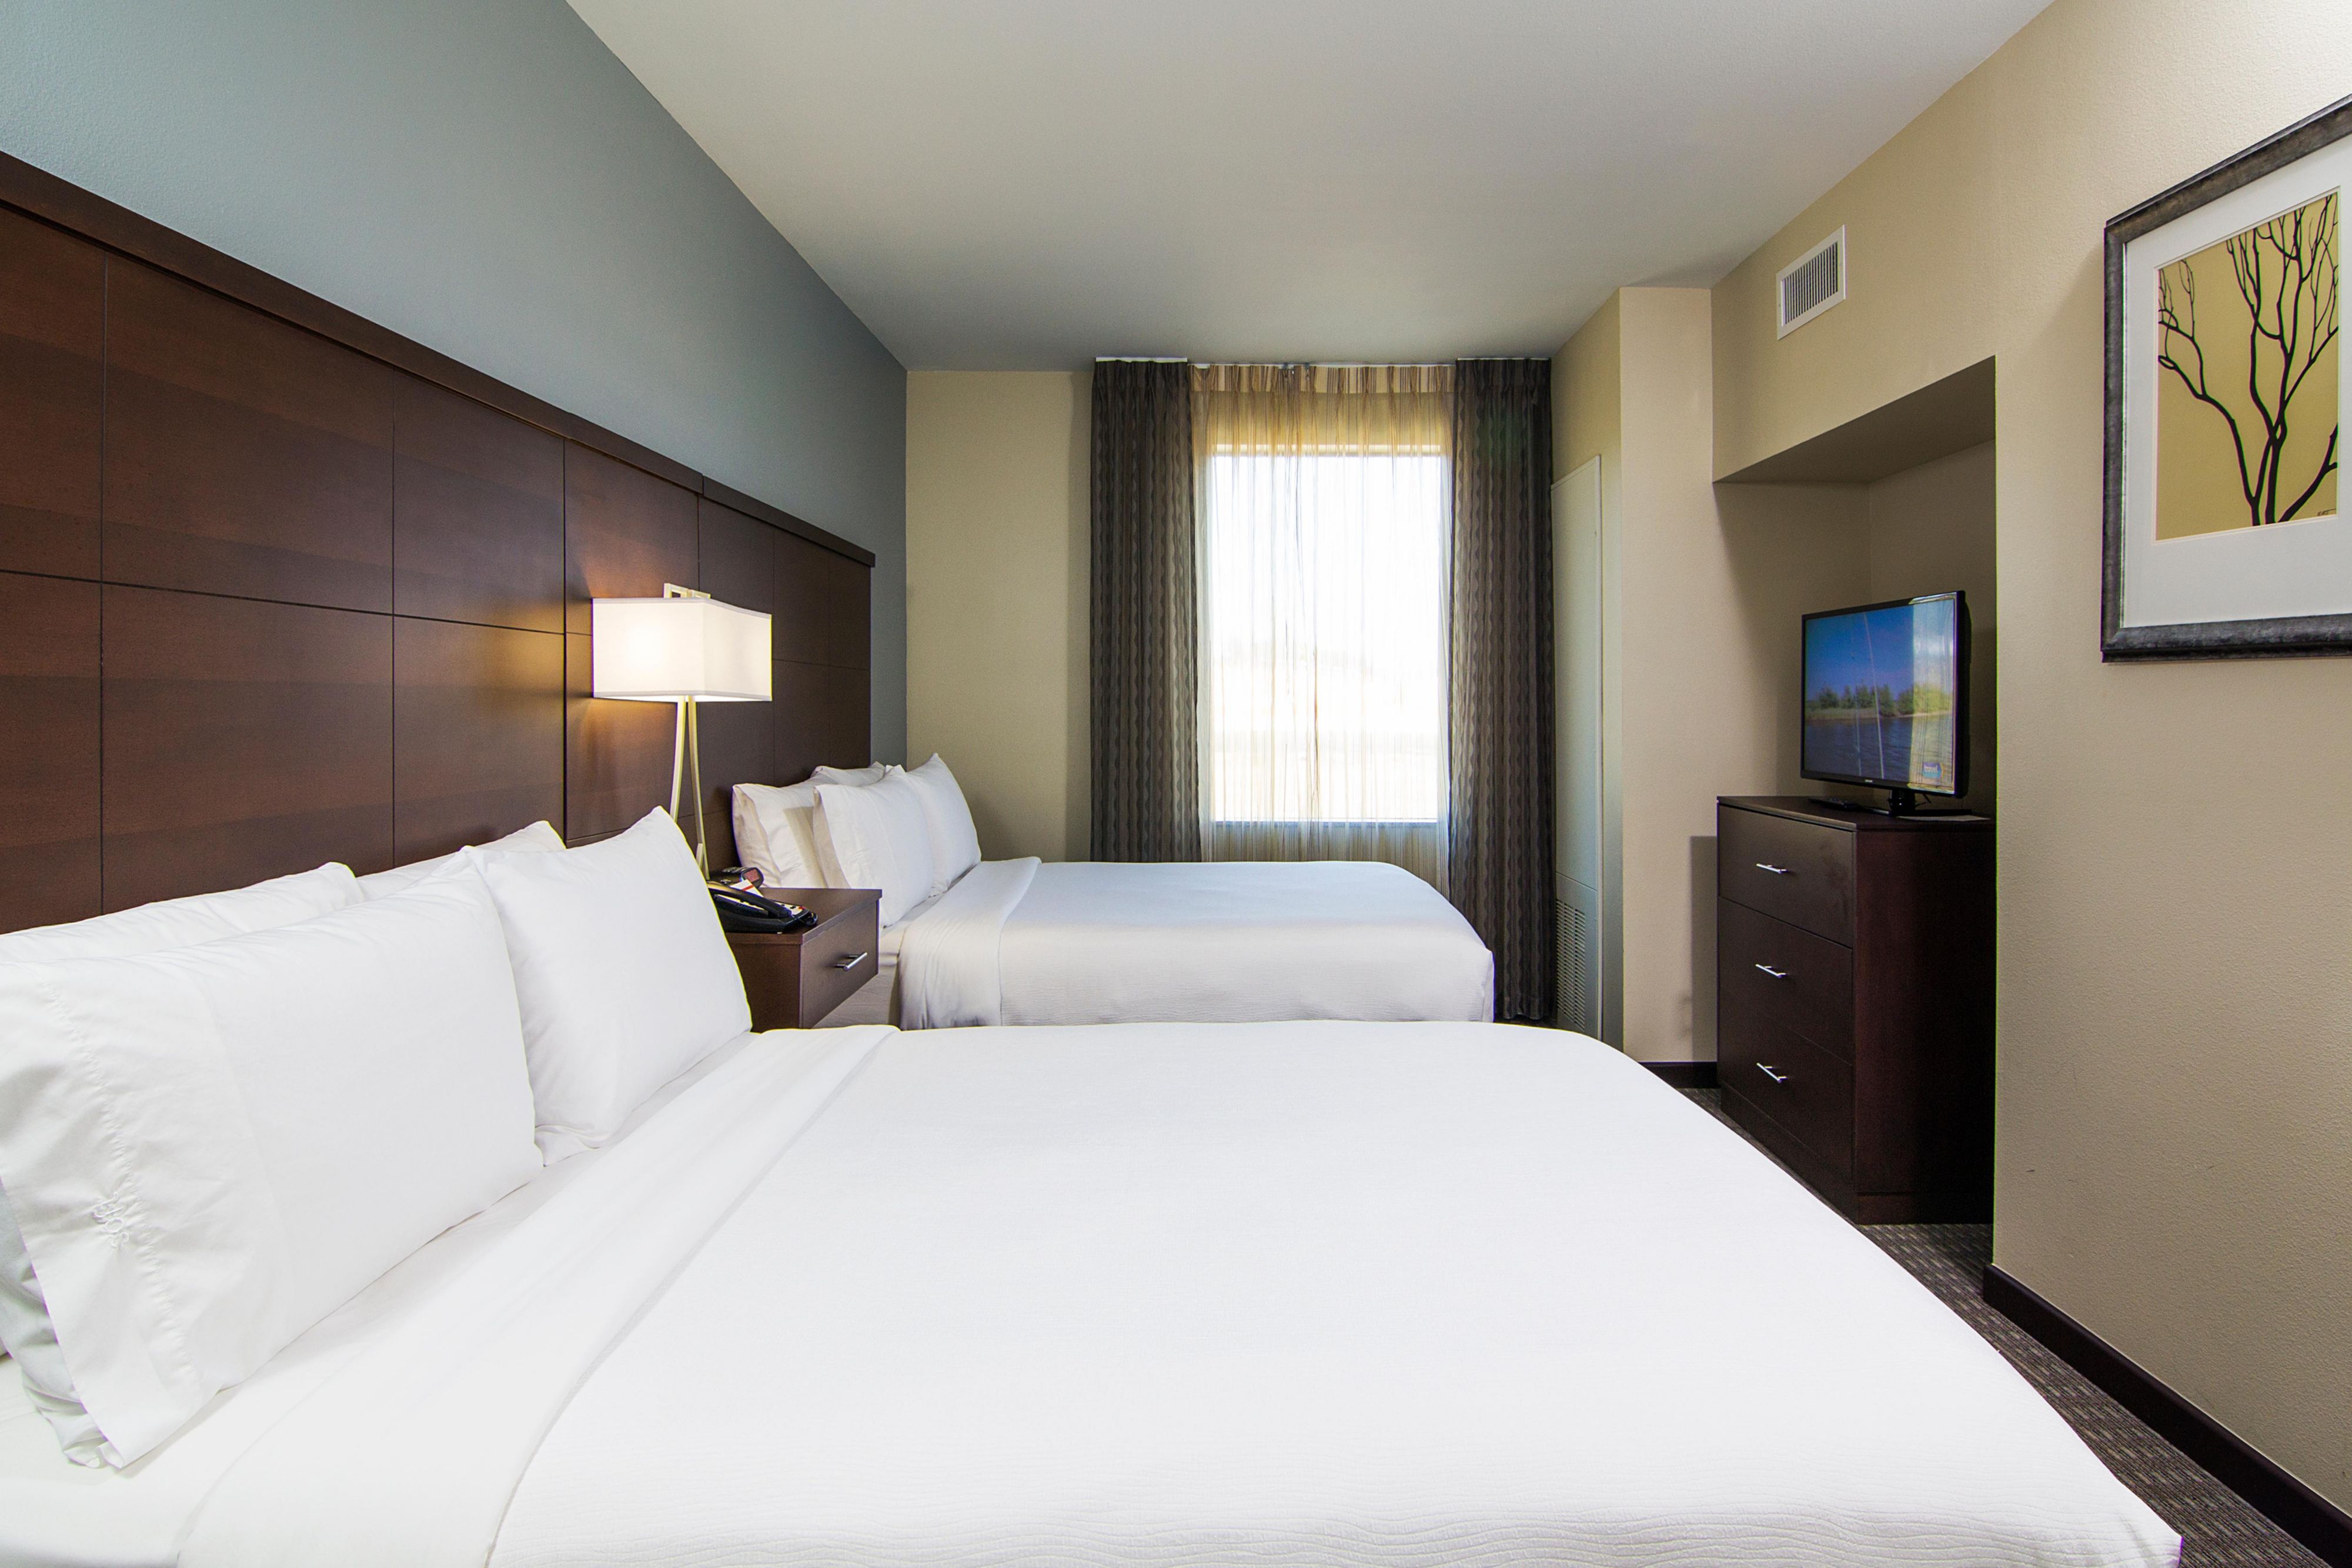 As the world adjusts to new travel norms, we’re enhancing our commitment to guests. That means clean, well-maintained, clutter-free rooms that exceed your expectations. If this isn’t exactly what you find when you arrive, then we promise to make it right. We're here to ensure you have a safe and memorable experience.